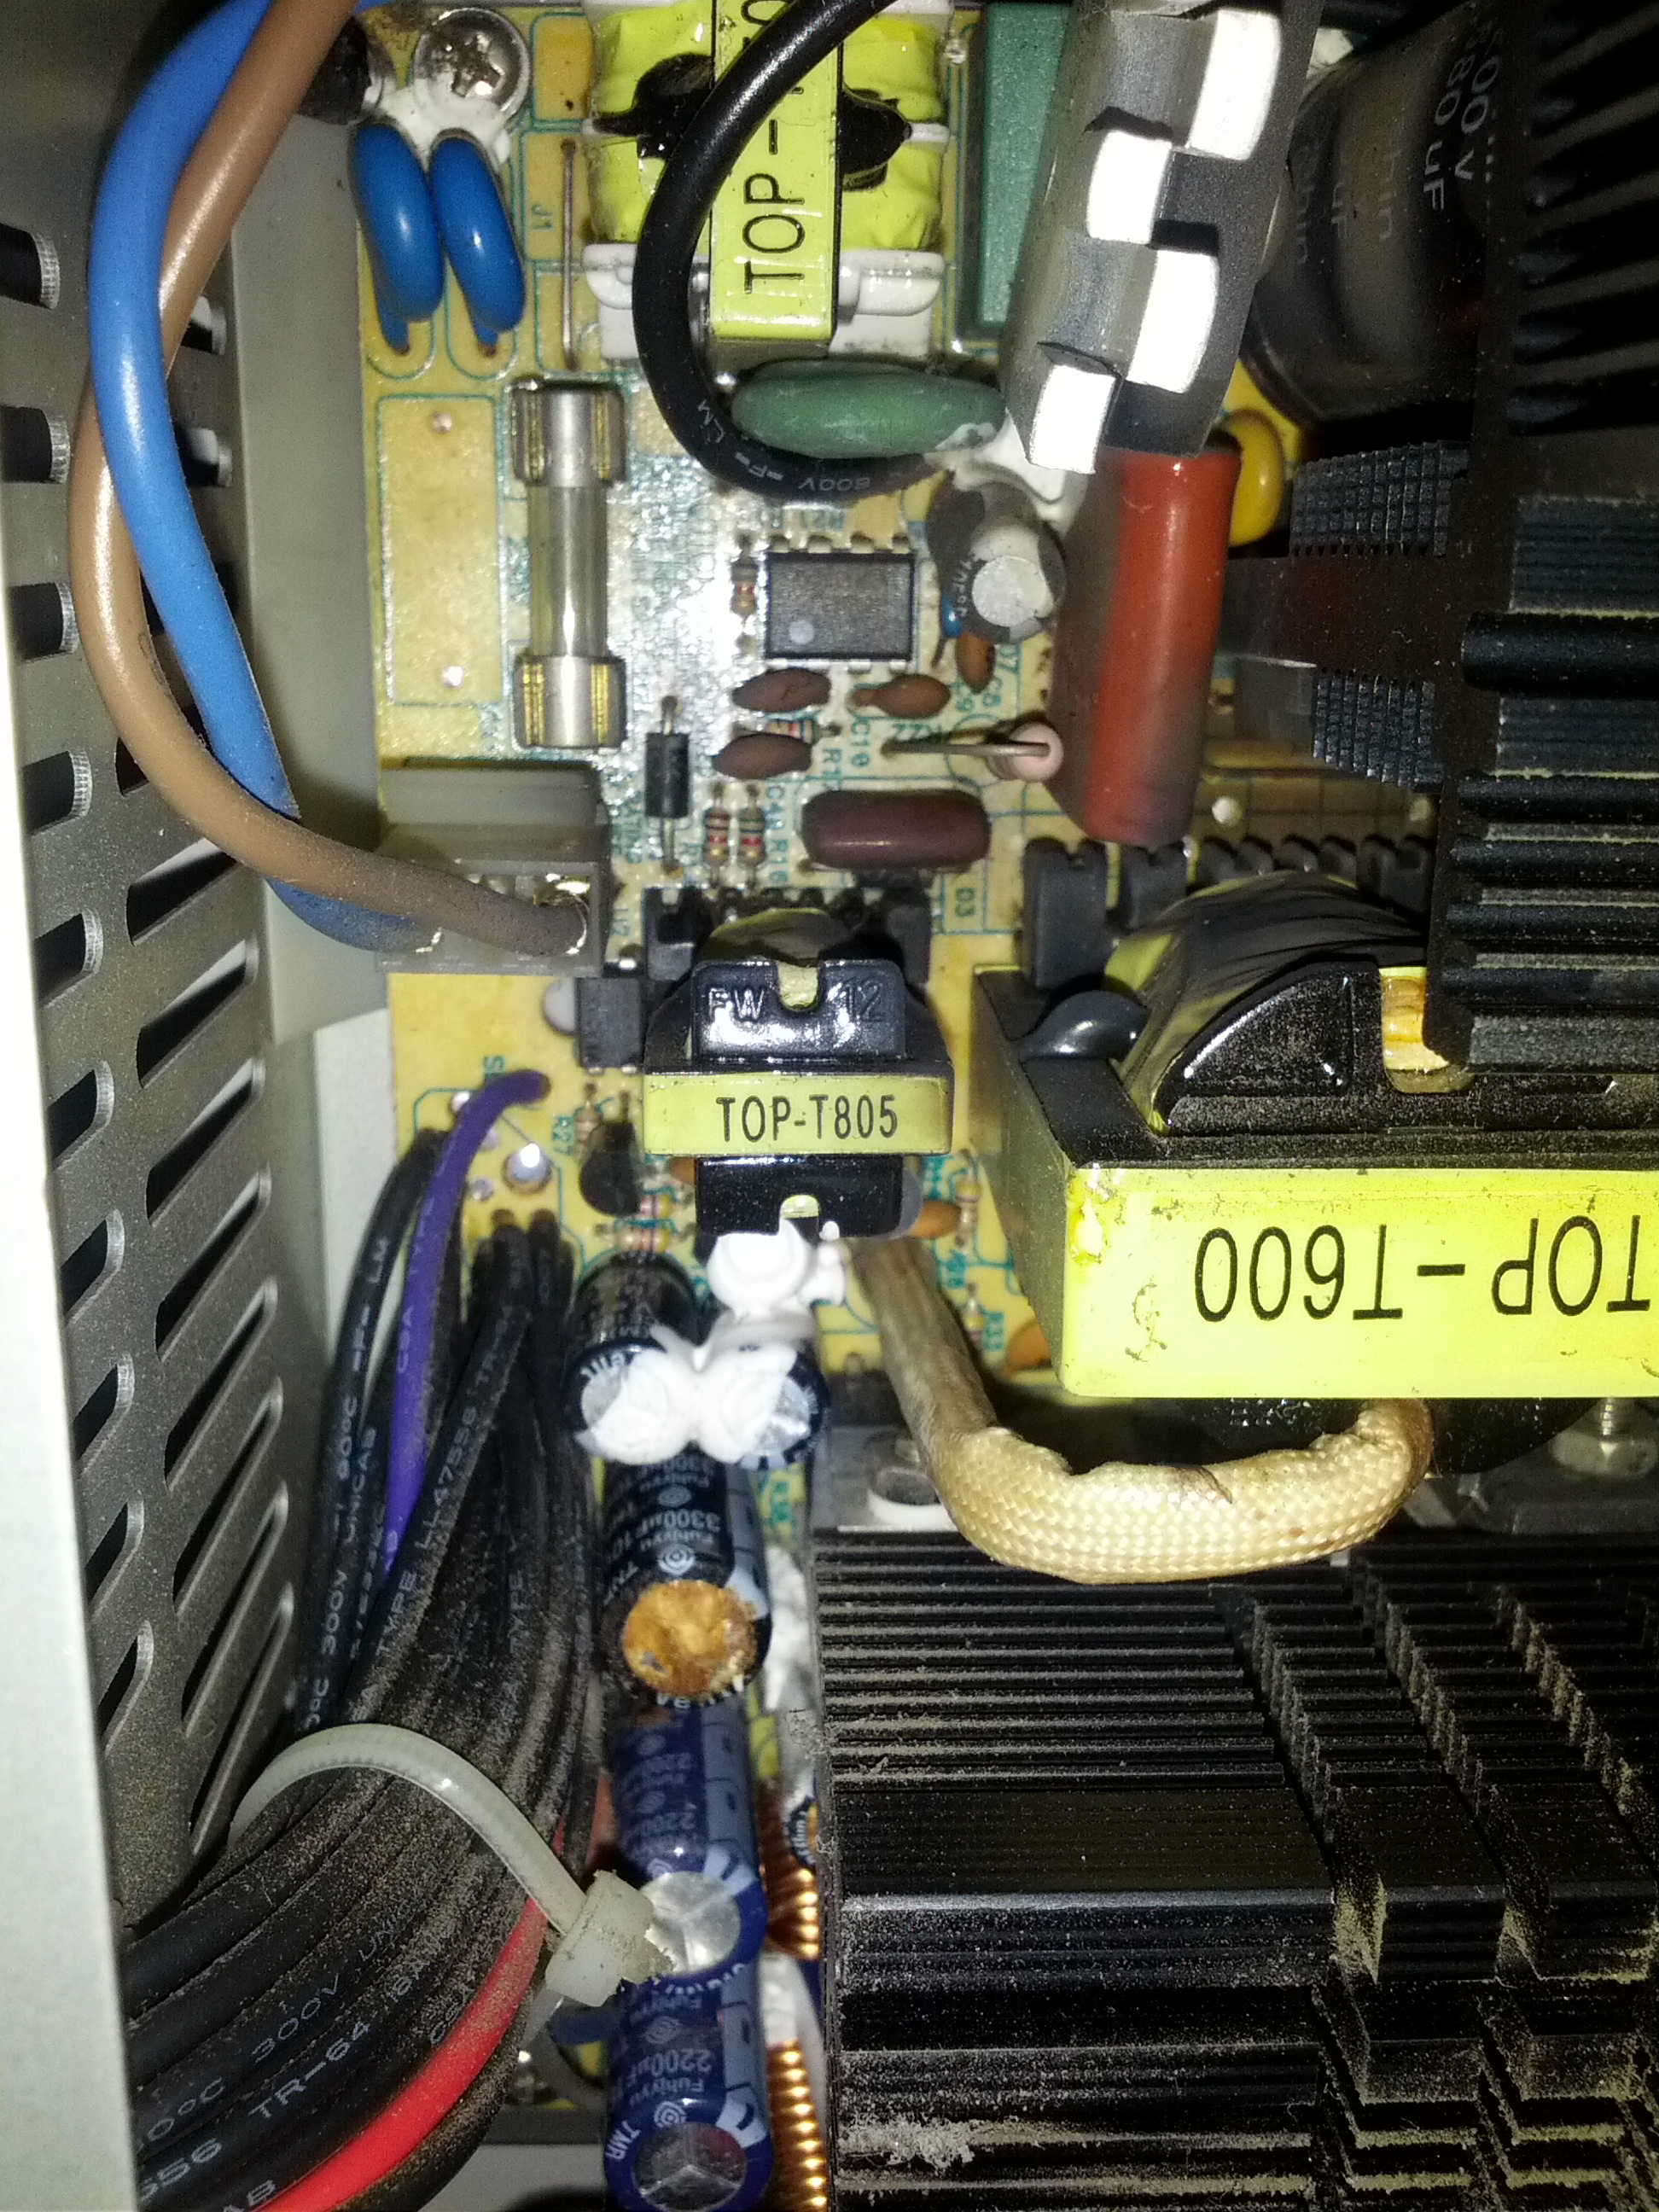 This disaster of a PSU is a good reminder why you never skimp on your PC's power  supply